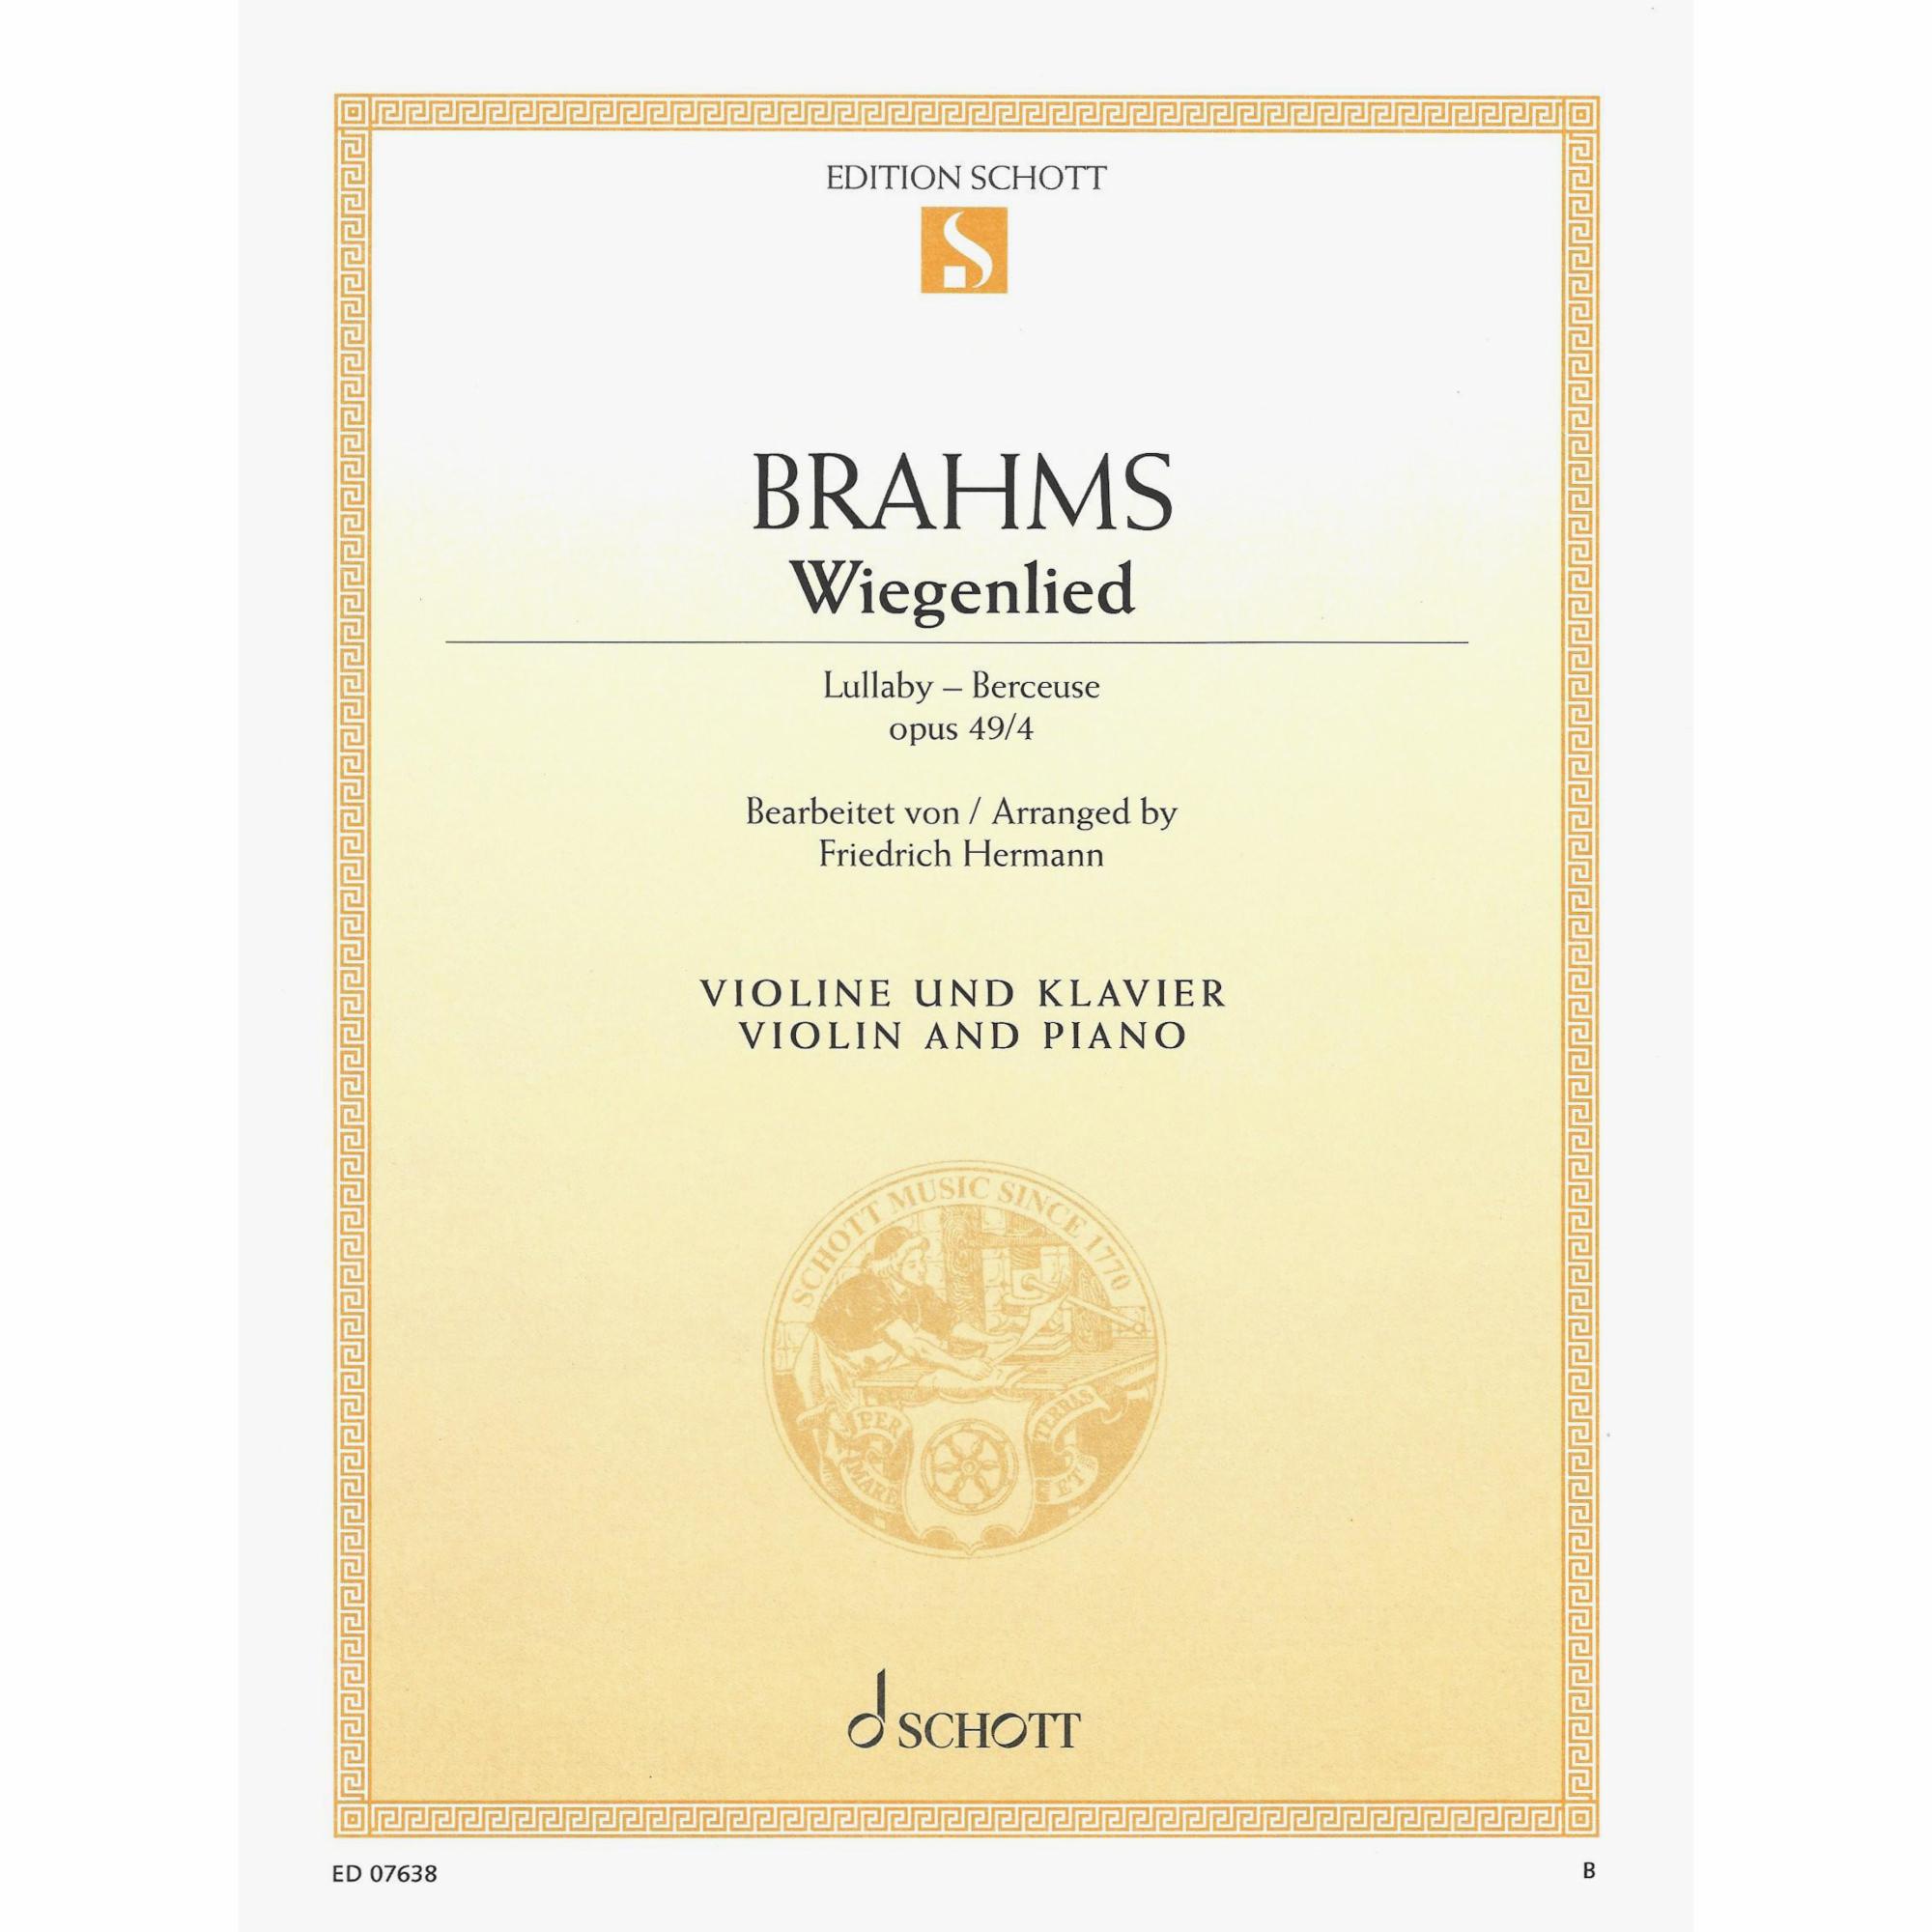 Brahms -- Lullaby, Op. 49, No. 4 for Violin and Piano